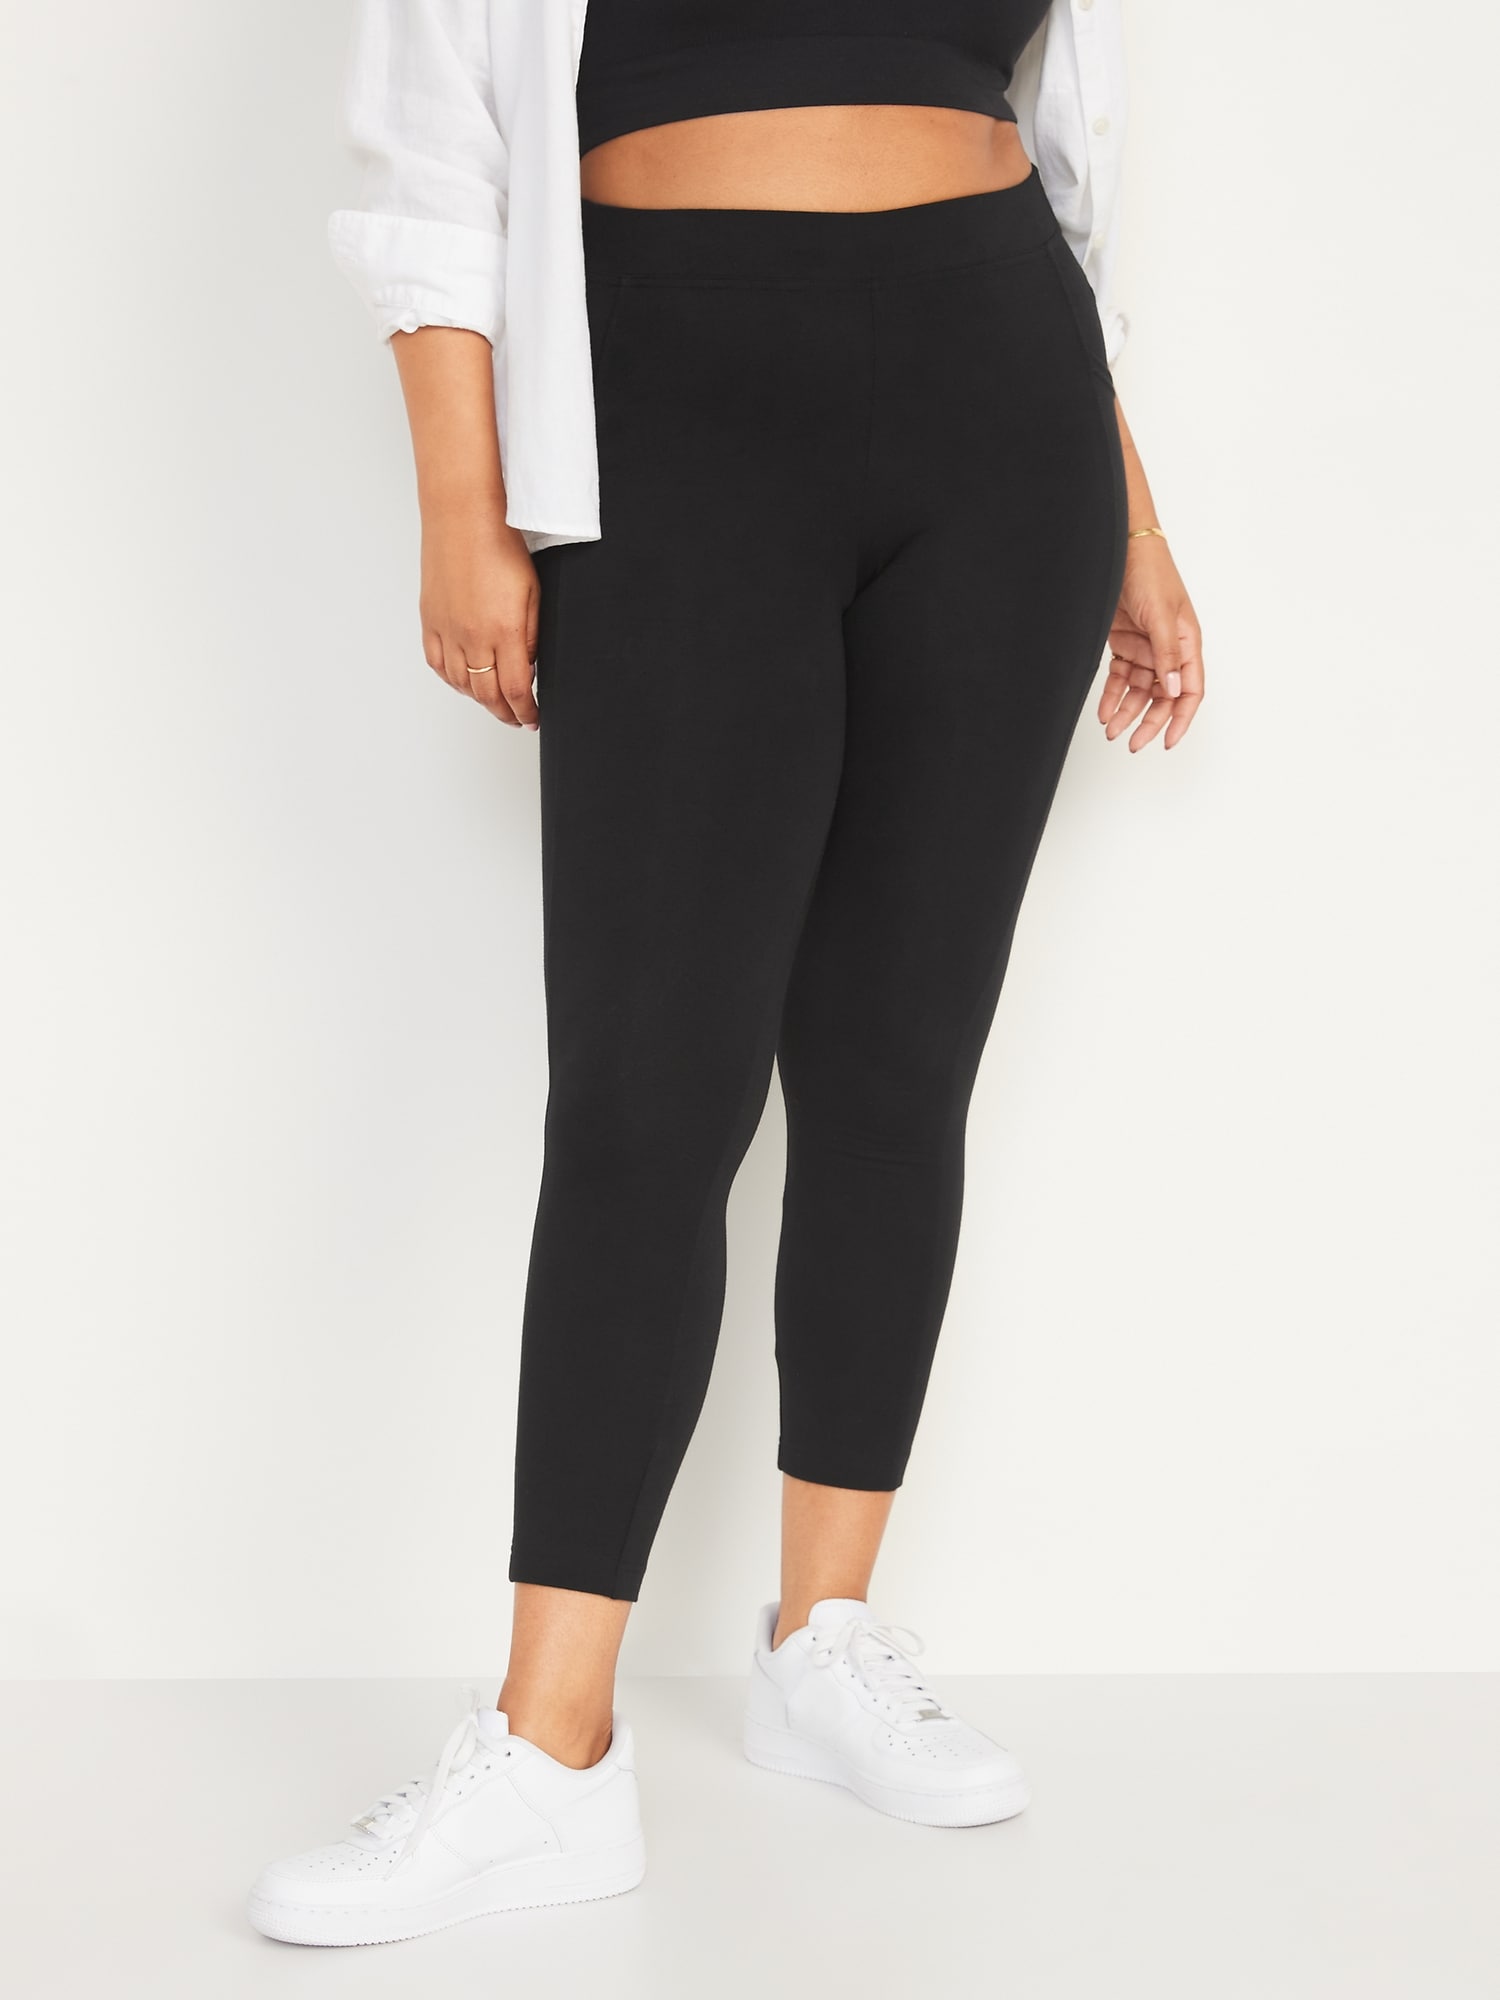 Yoga Pants with Pockets for Women Plus Size Petite Women High